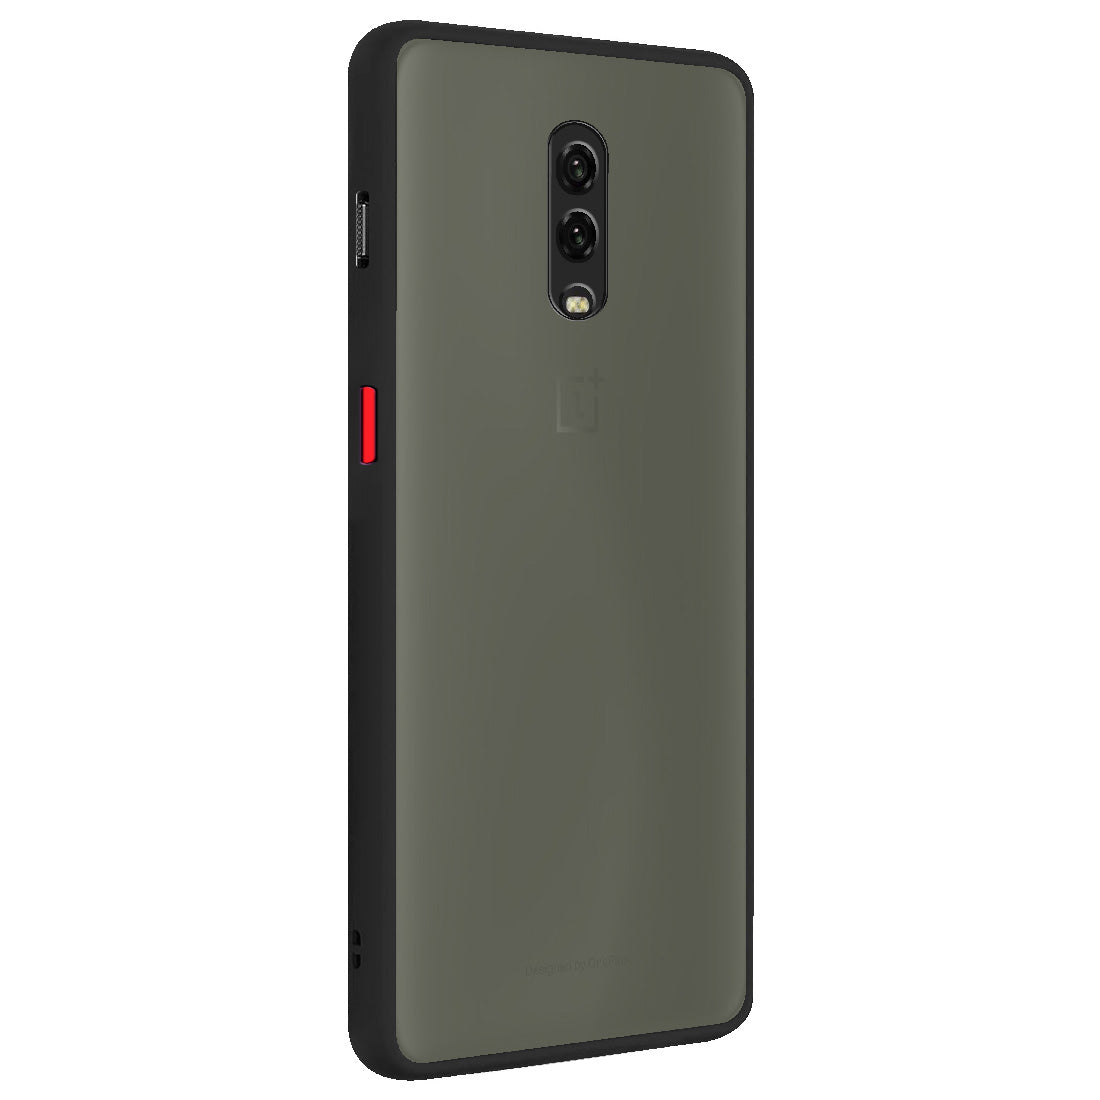 Smoke Back Case Cover for OnePlus 6T